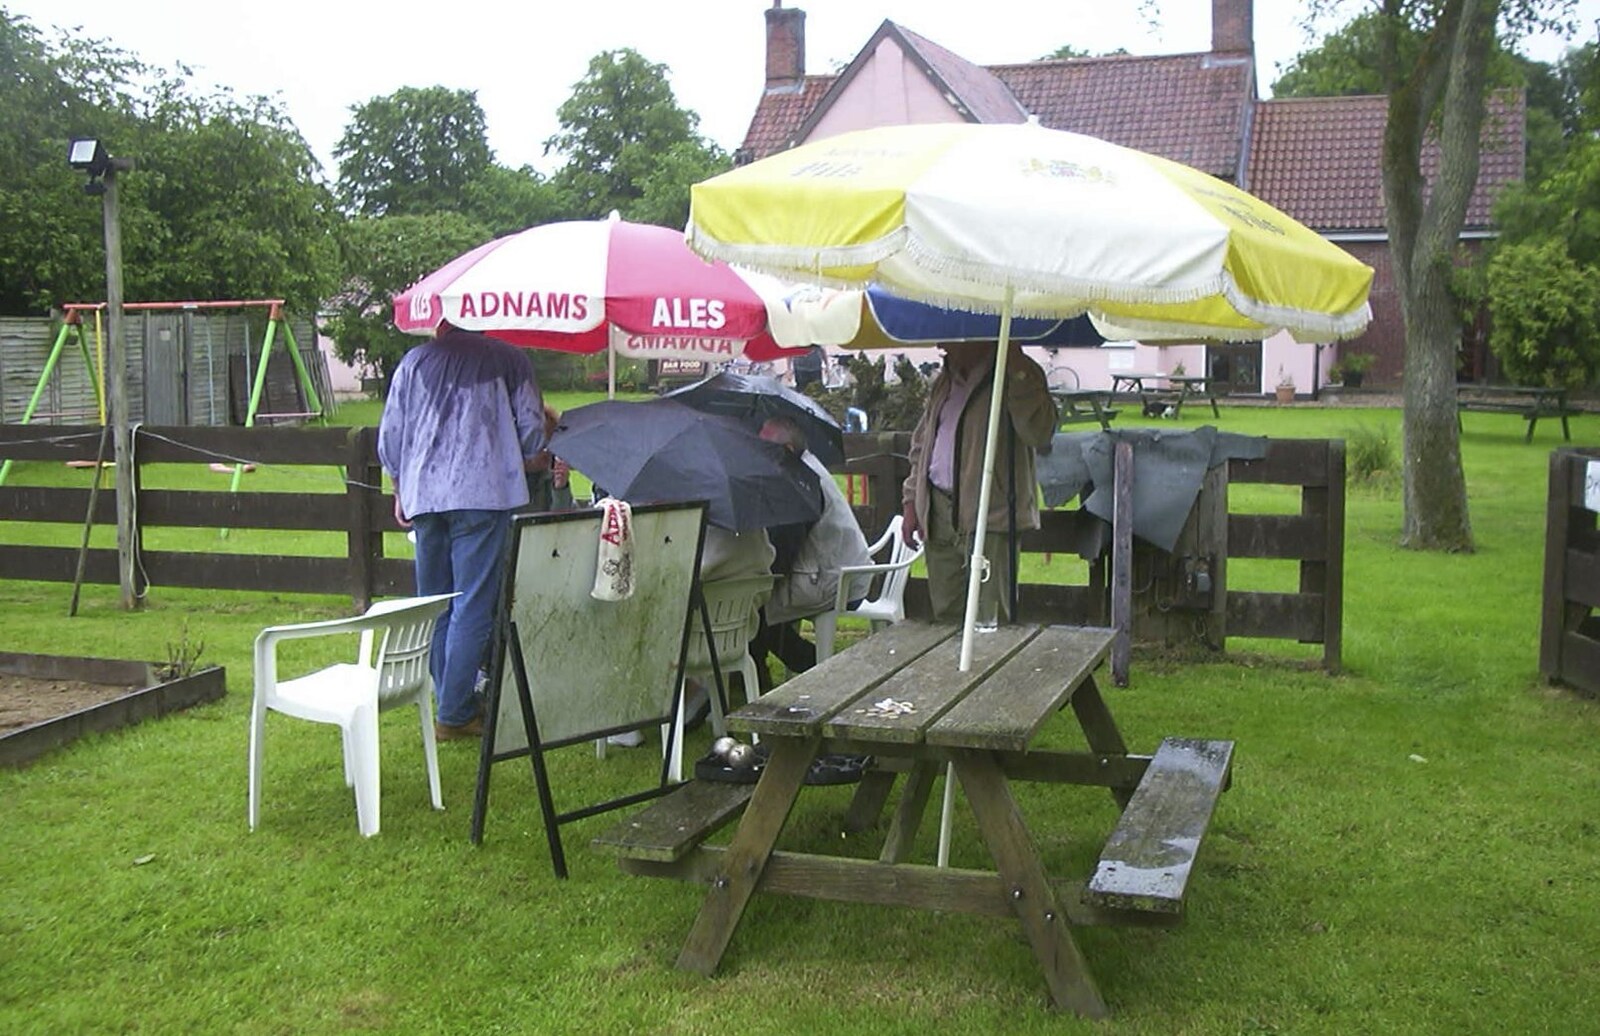 A Rainy Barbeque at the Swan Inn, Brome, Suffolk - 15th June 2002: The huddled masses